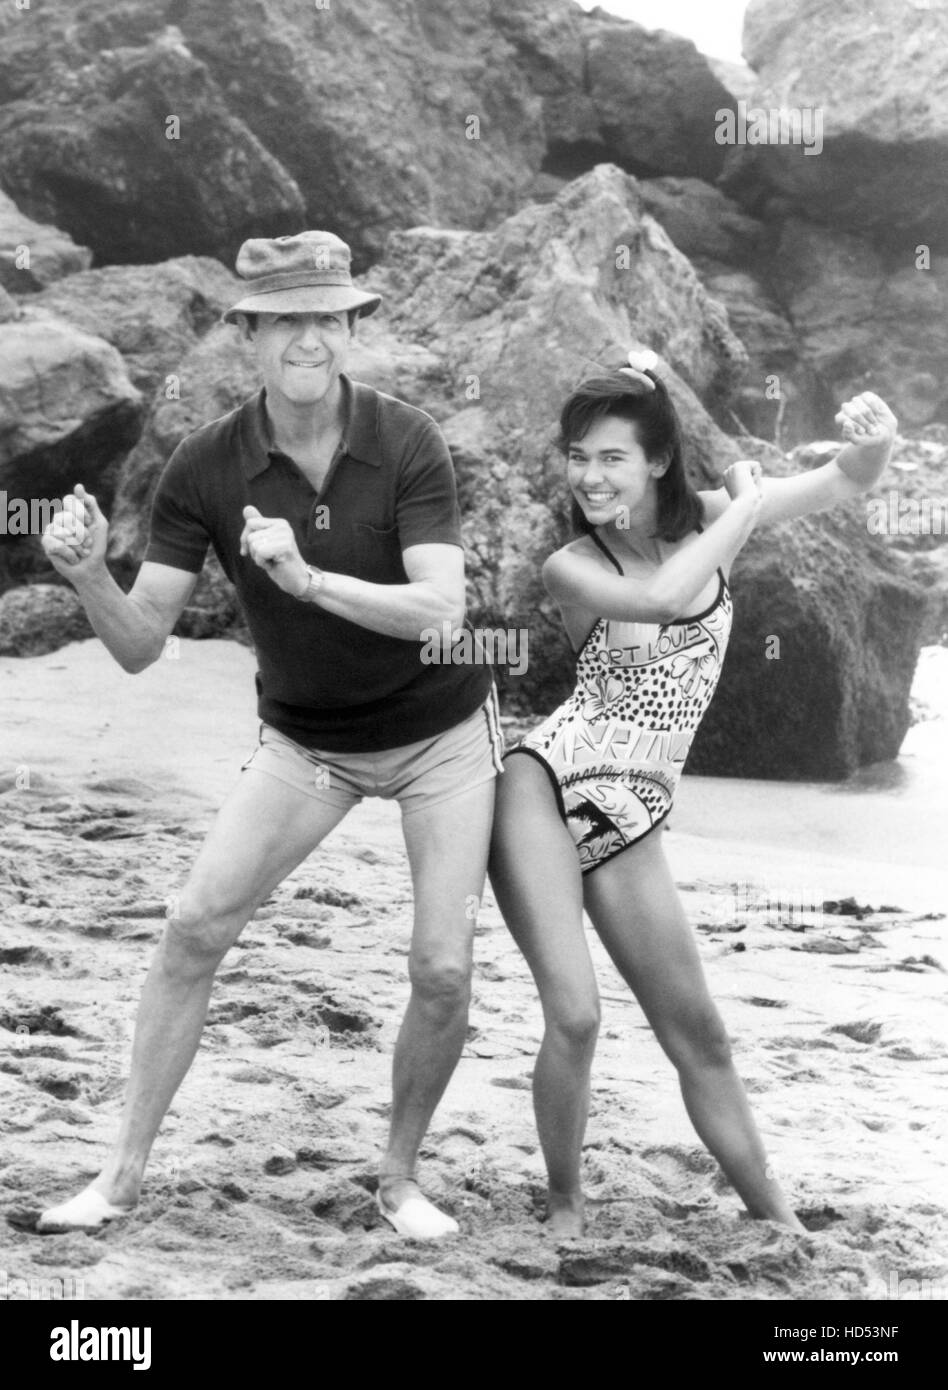 THE NEW GIDGET, (from left): William Schallert, Sydney Penny, (Season 1), 1986-88. © Columbia Pictures Television / Courtesy: Stock Photo